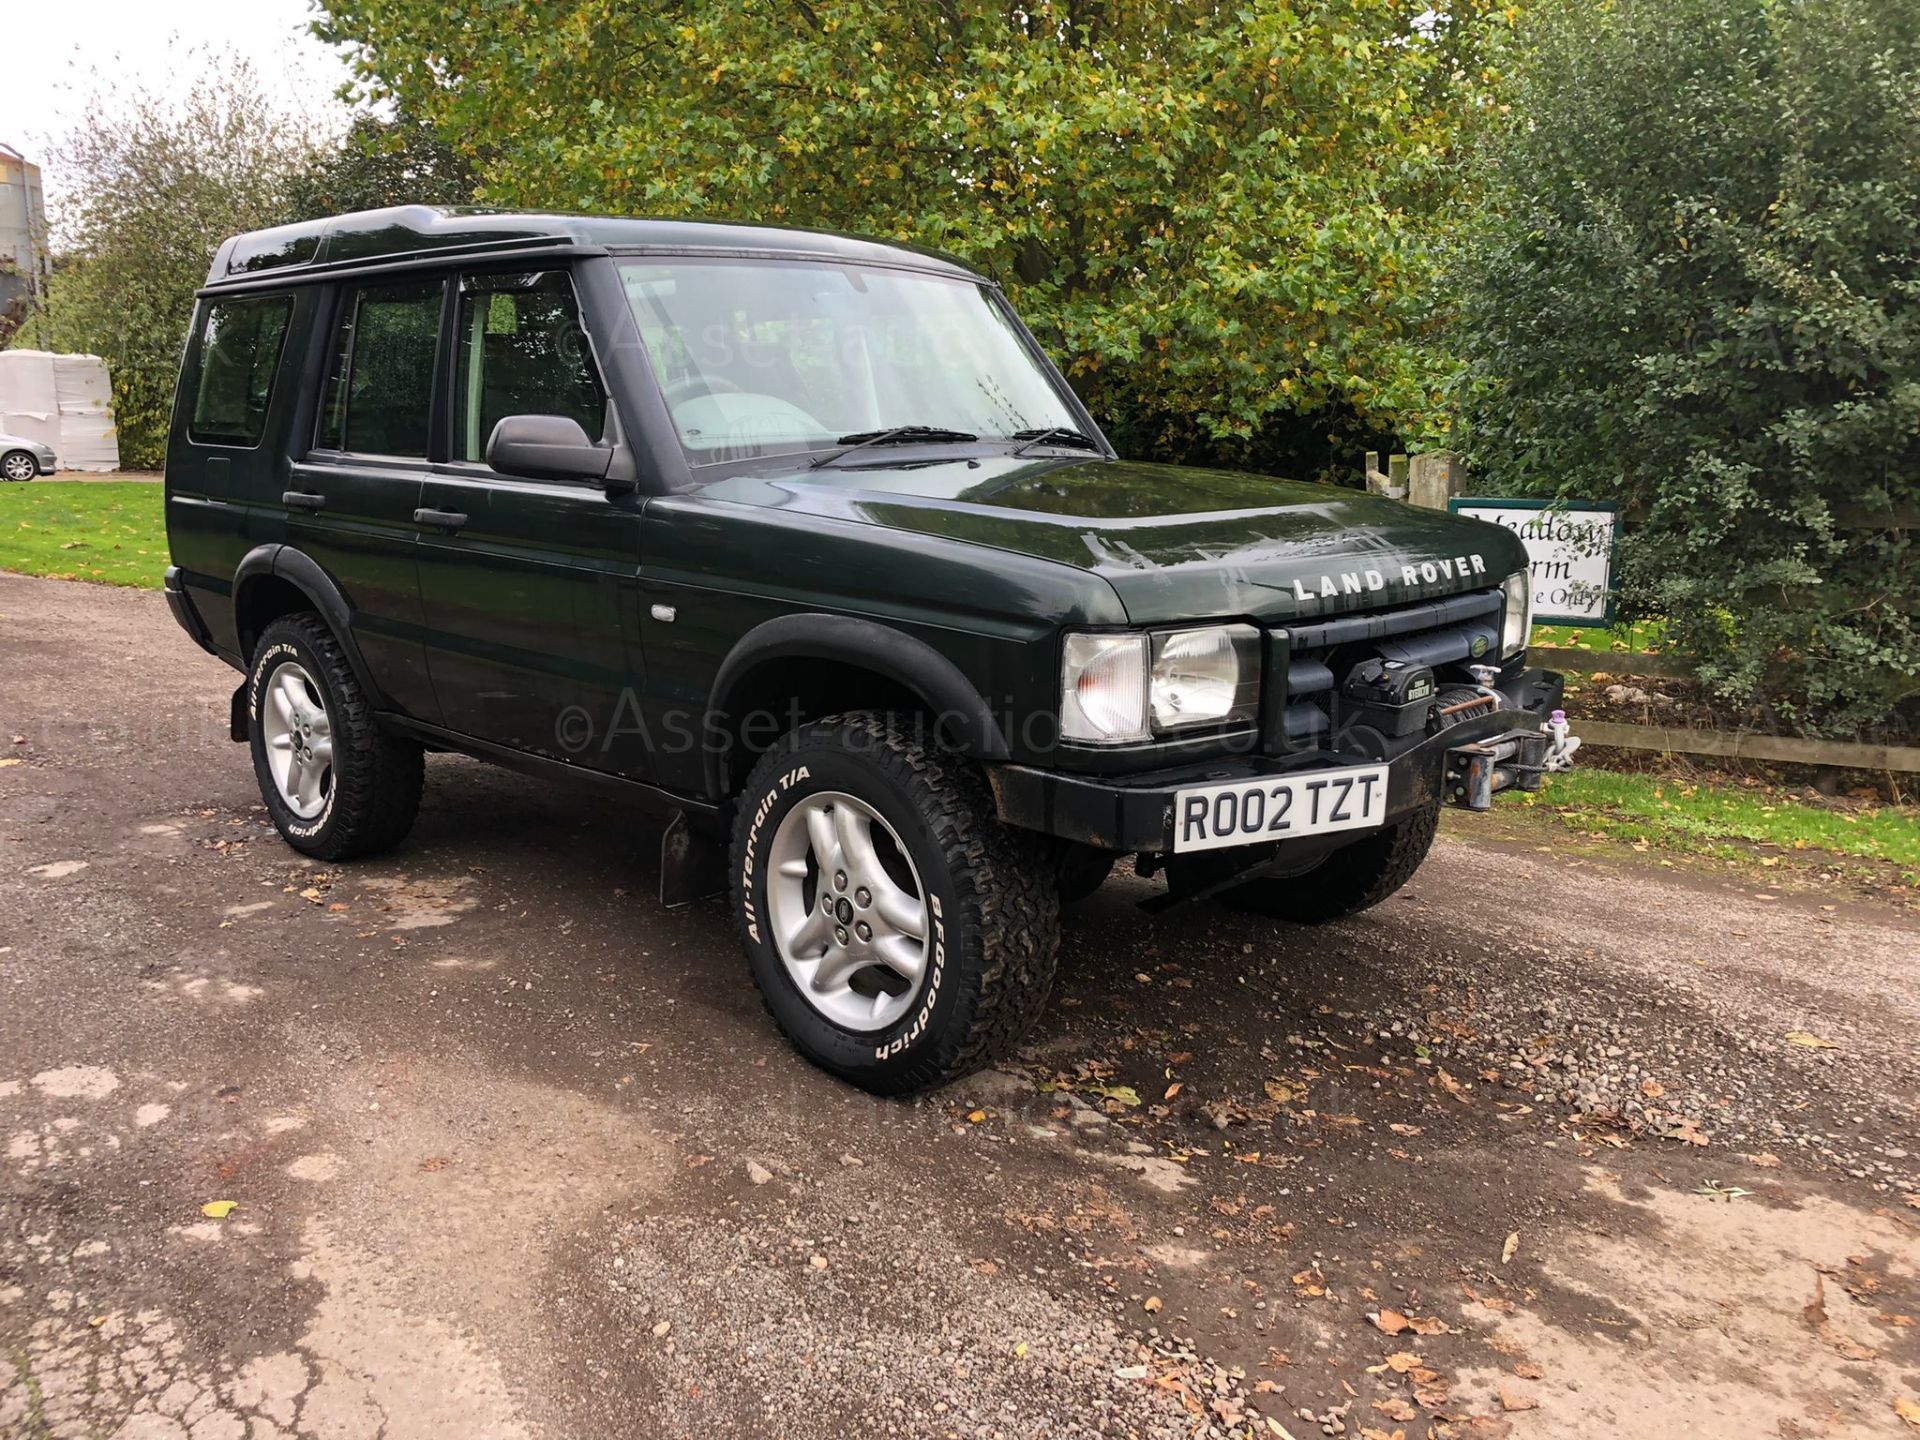 2002 LAND ROVER DISCOVERY TD5 S AUTO GREEN ESTATE, 139,862 MILES, 2.5 DIESEL *NO VAT*